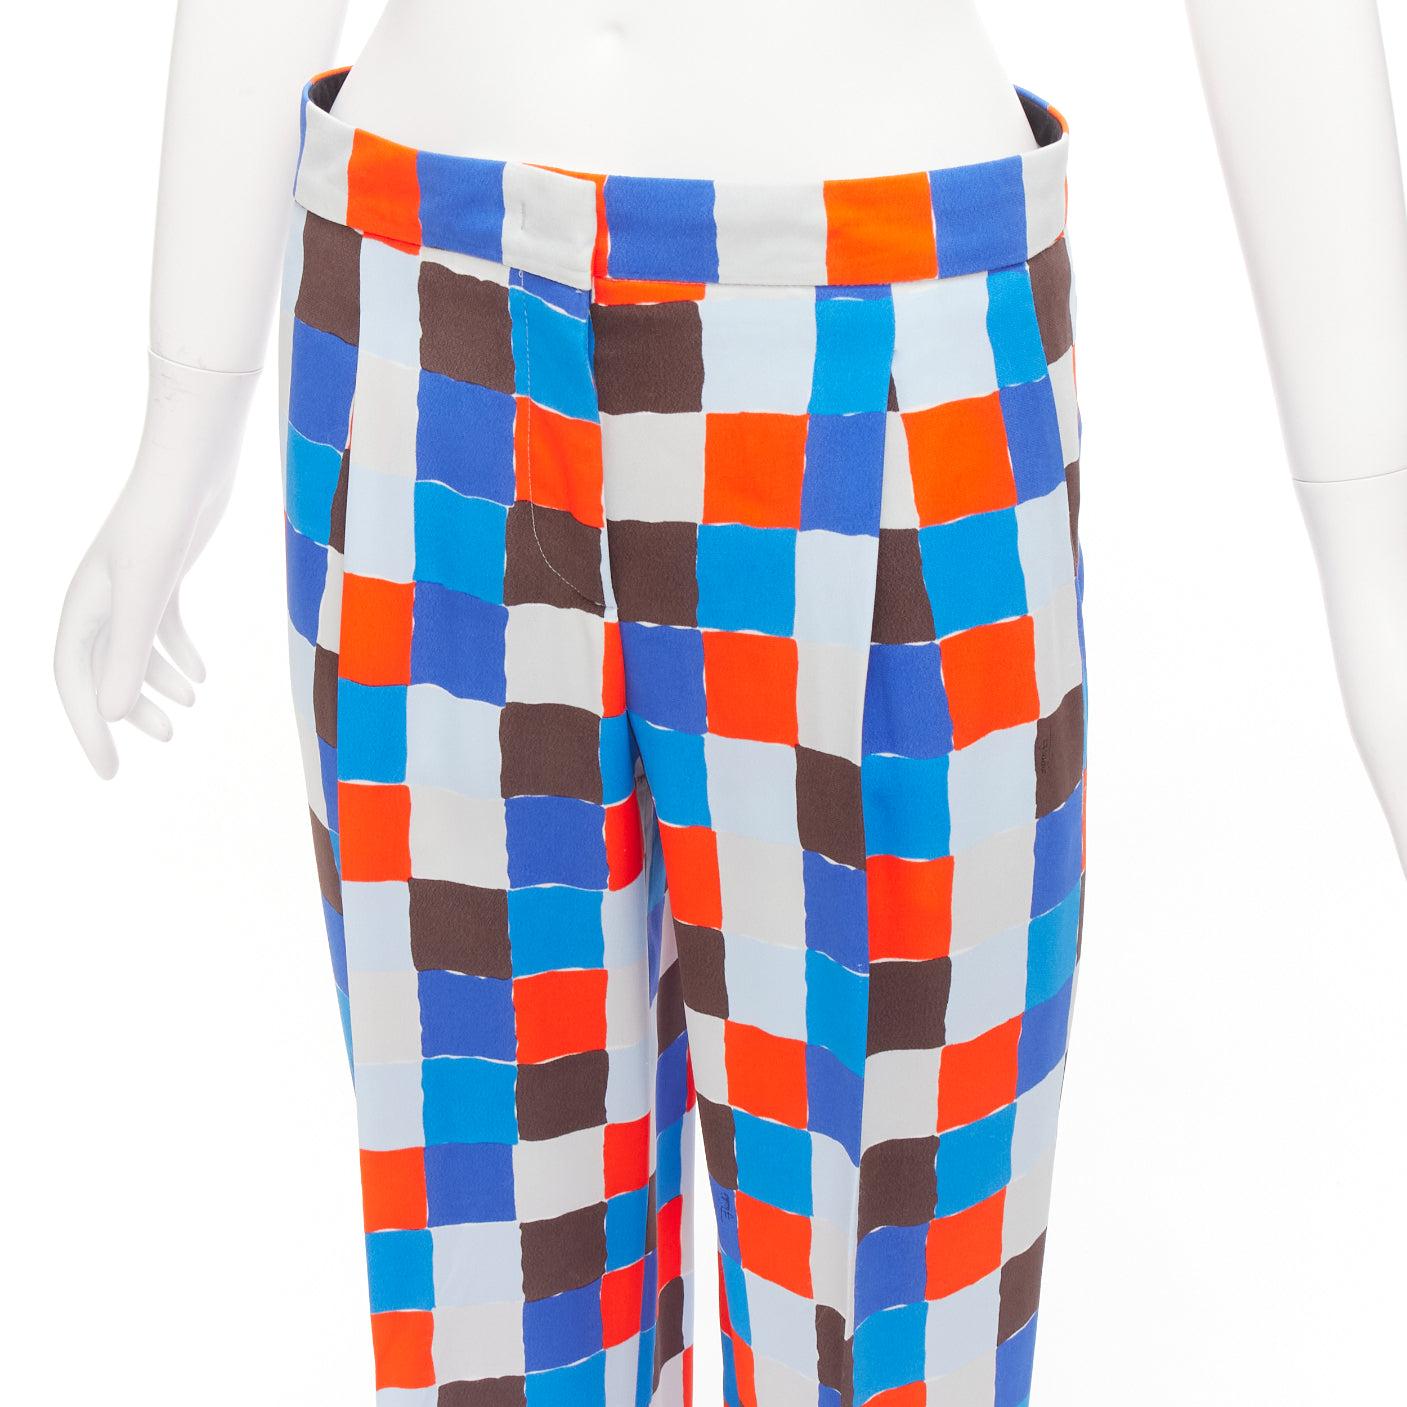 EMILIO PUCCI Runway orange blue watercolour check mid waist pants IT38 XS
Reference: NKLL/A00212
Brand: Emilio Pucci
Collection: 2016 - Runway
Material: Viscose
Color: Orange, Blue
Pattern: Checkered
Closure: Zip Fly
Lining: White Cotton
Made in: